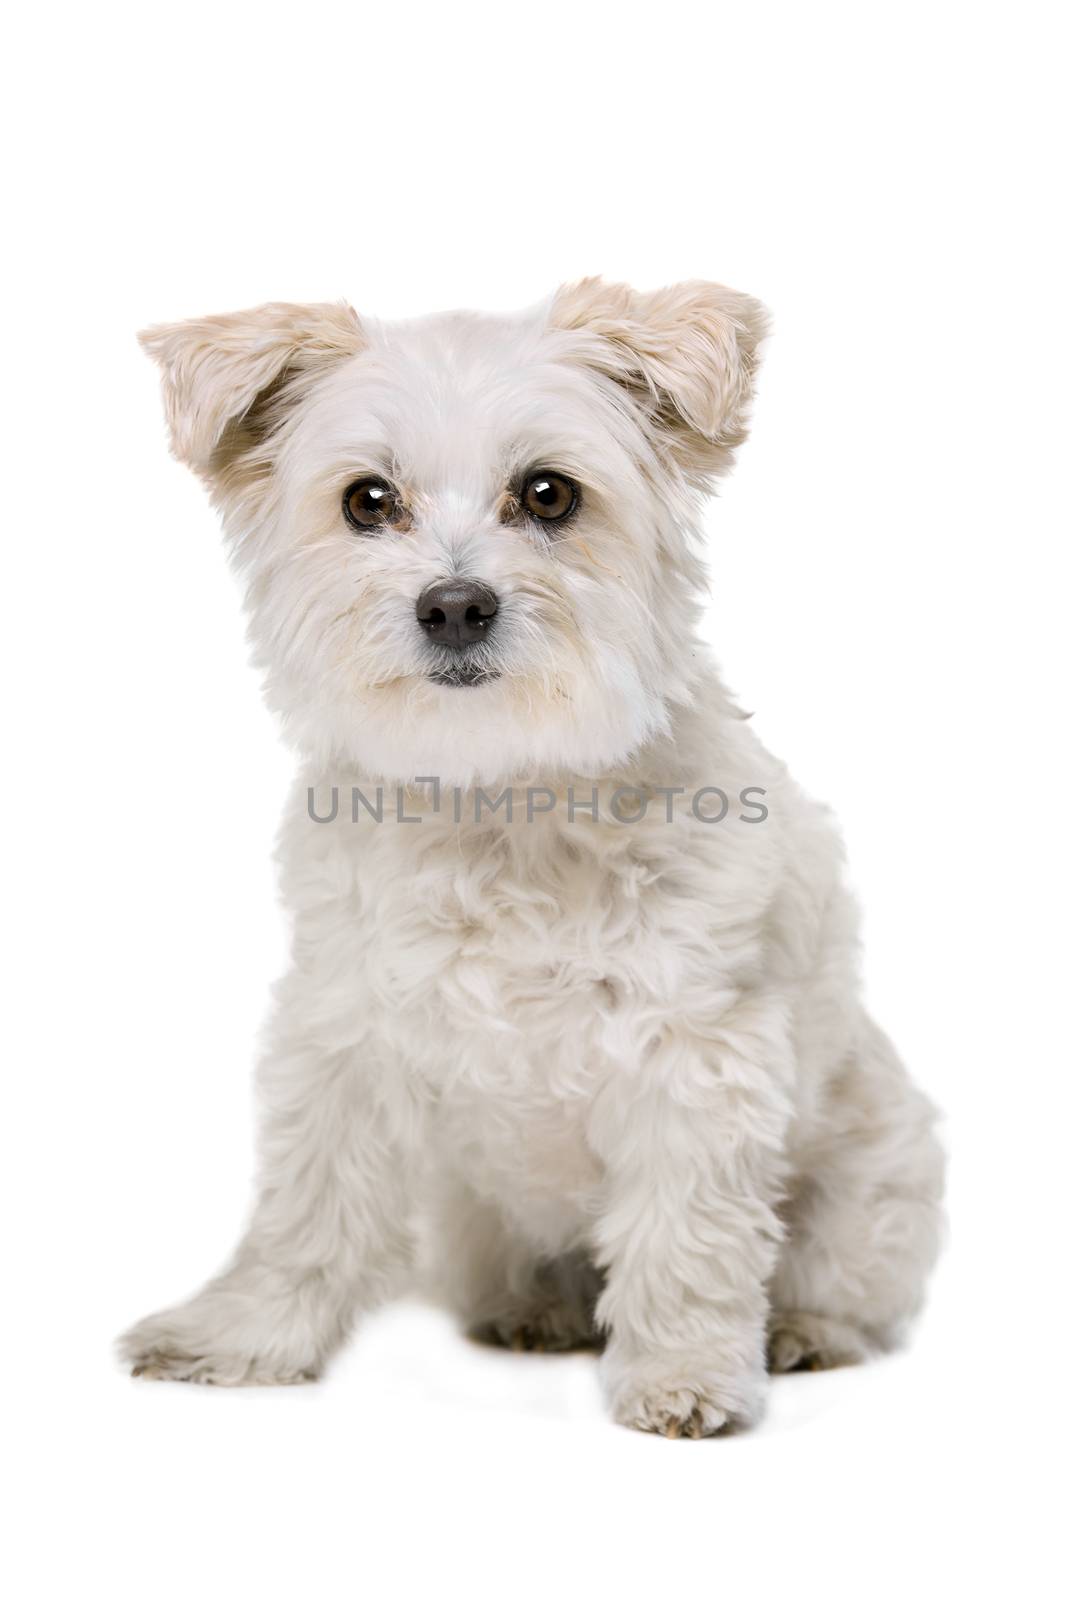 Mixed breed dog in front of a white background